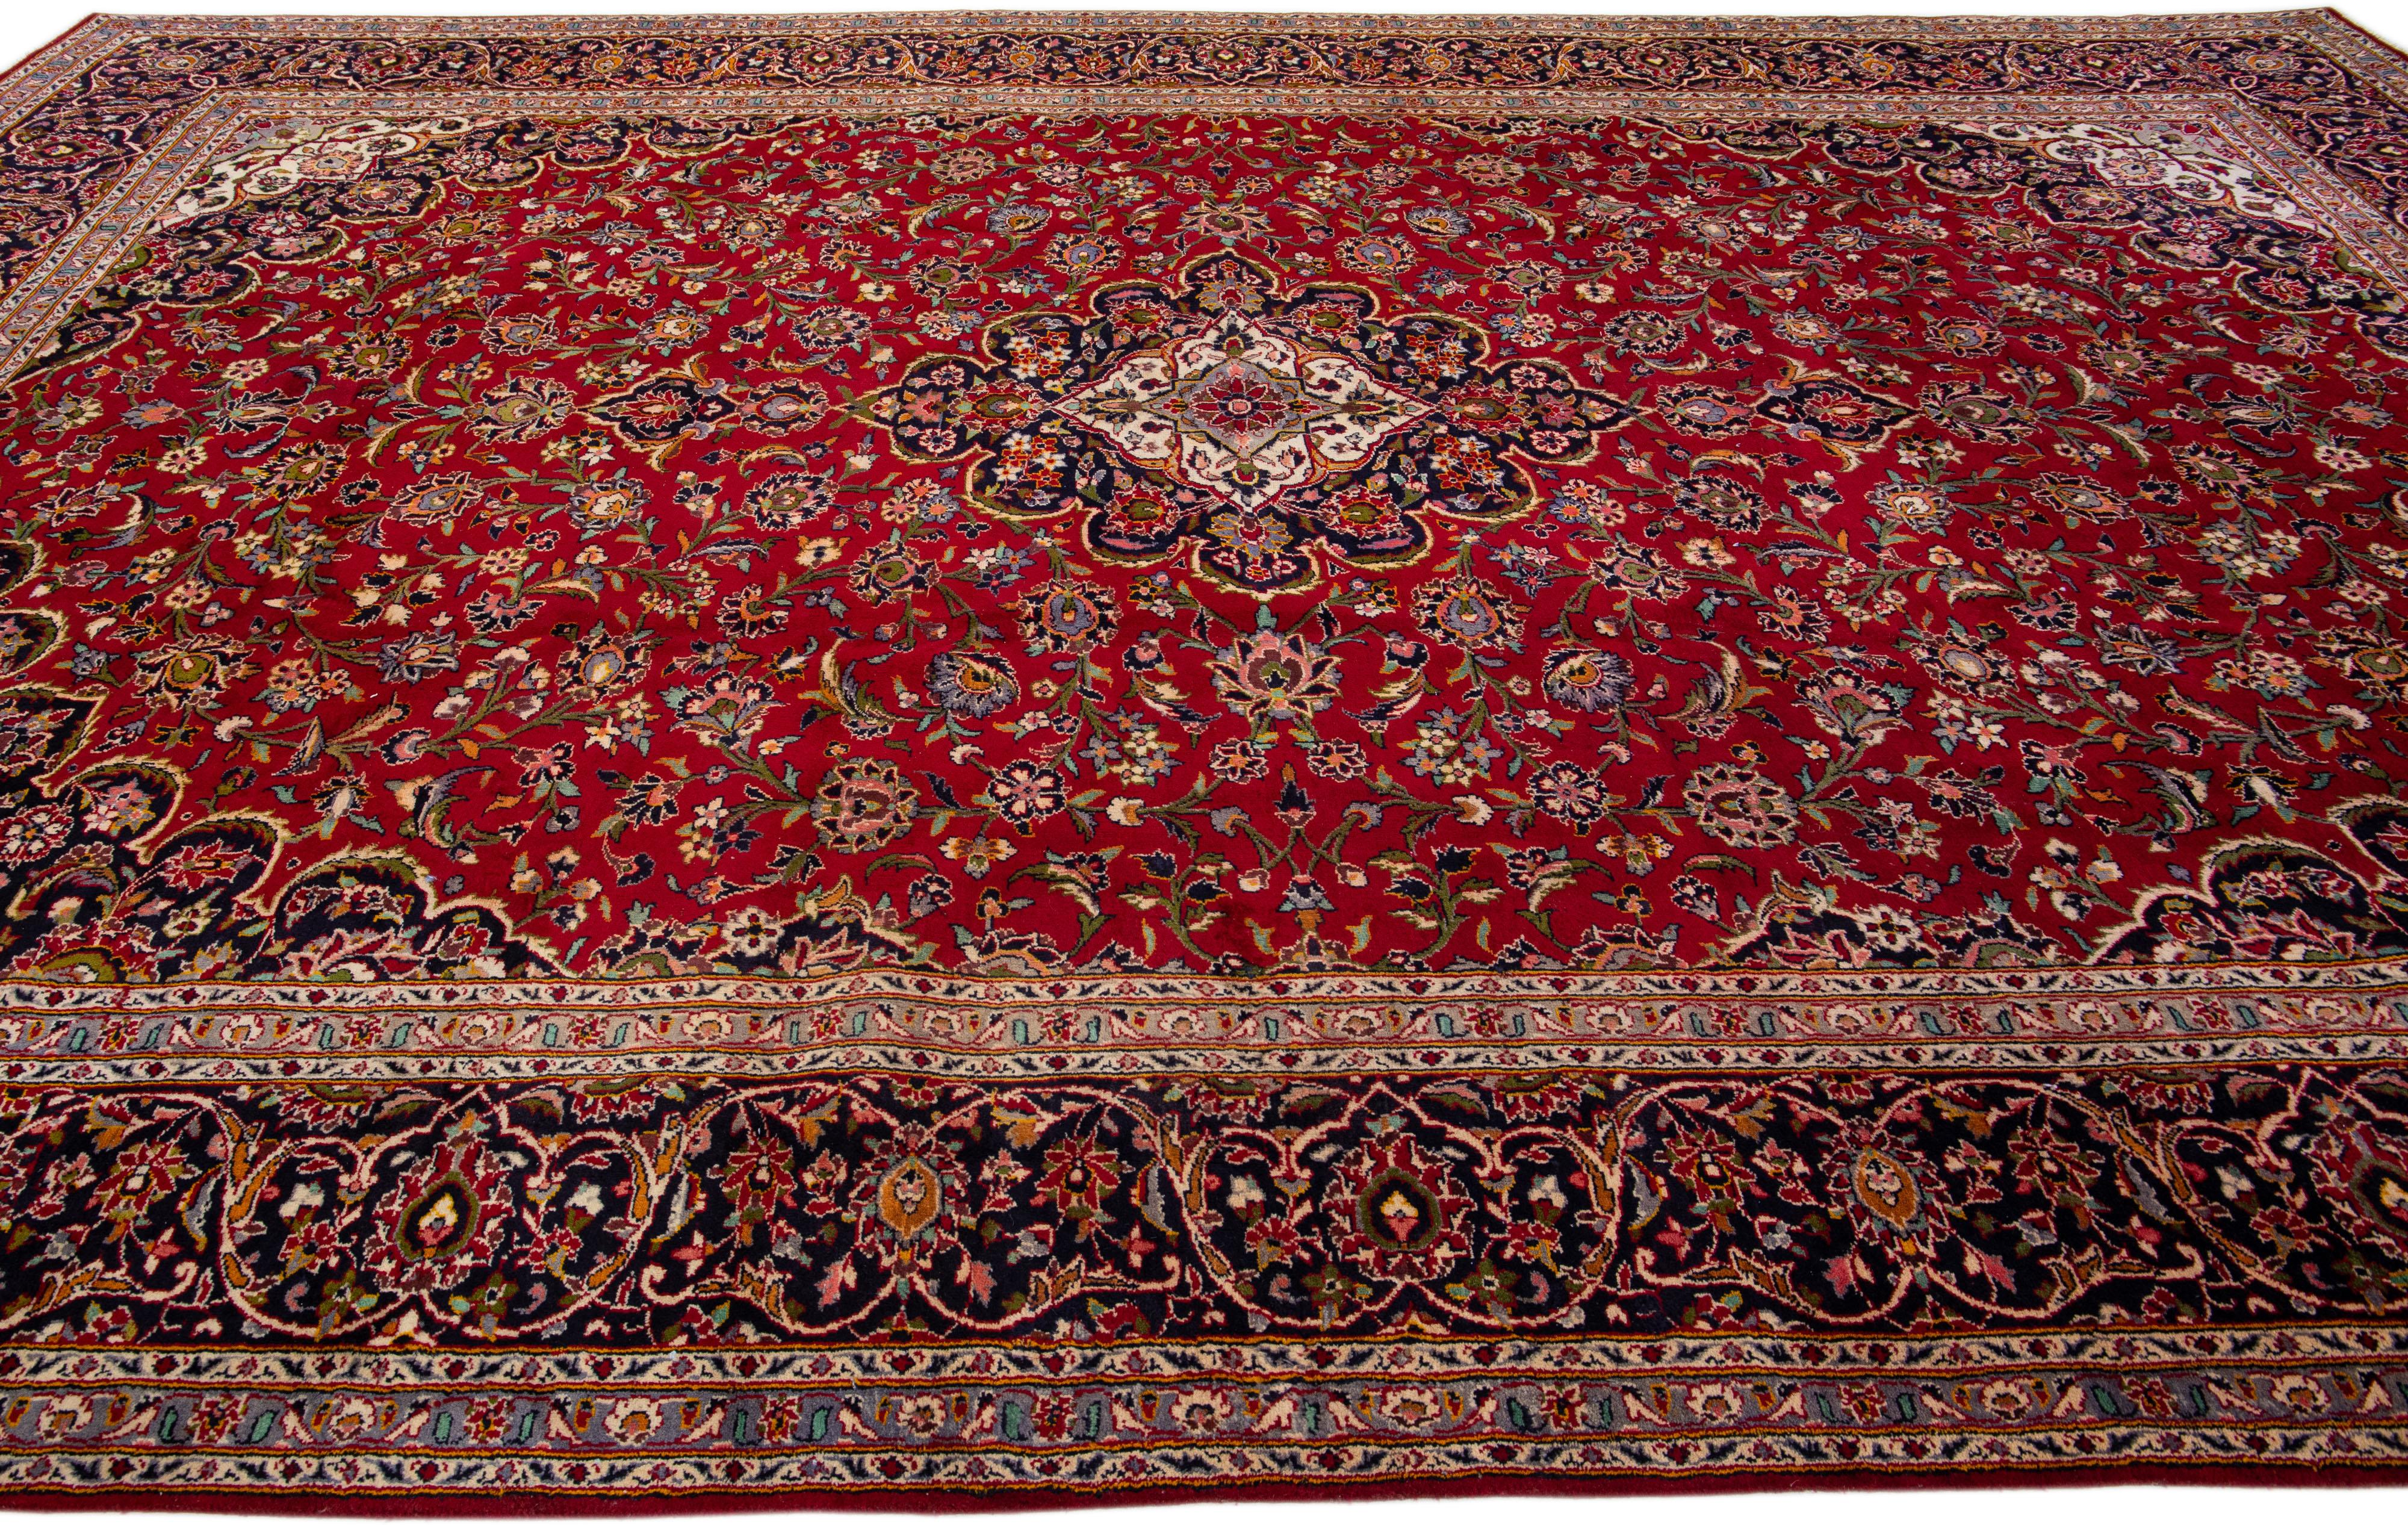 Oversize Antique Persian Kashan Handmade Medallion Wool Rug in Red In Good Condition For Sale In Norwalk, CT